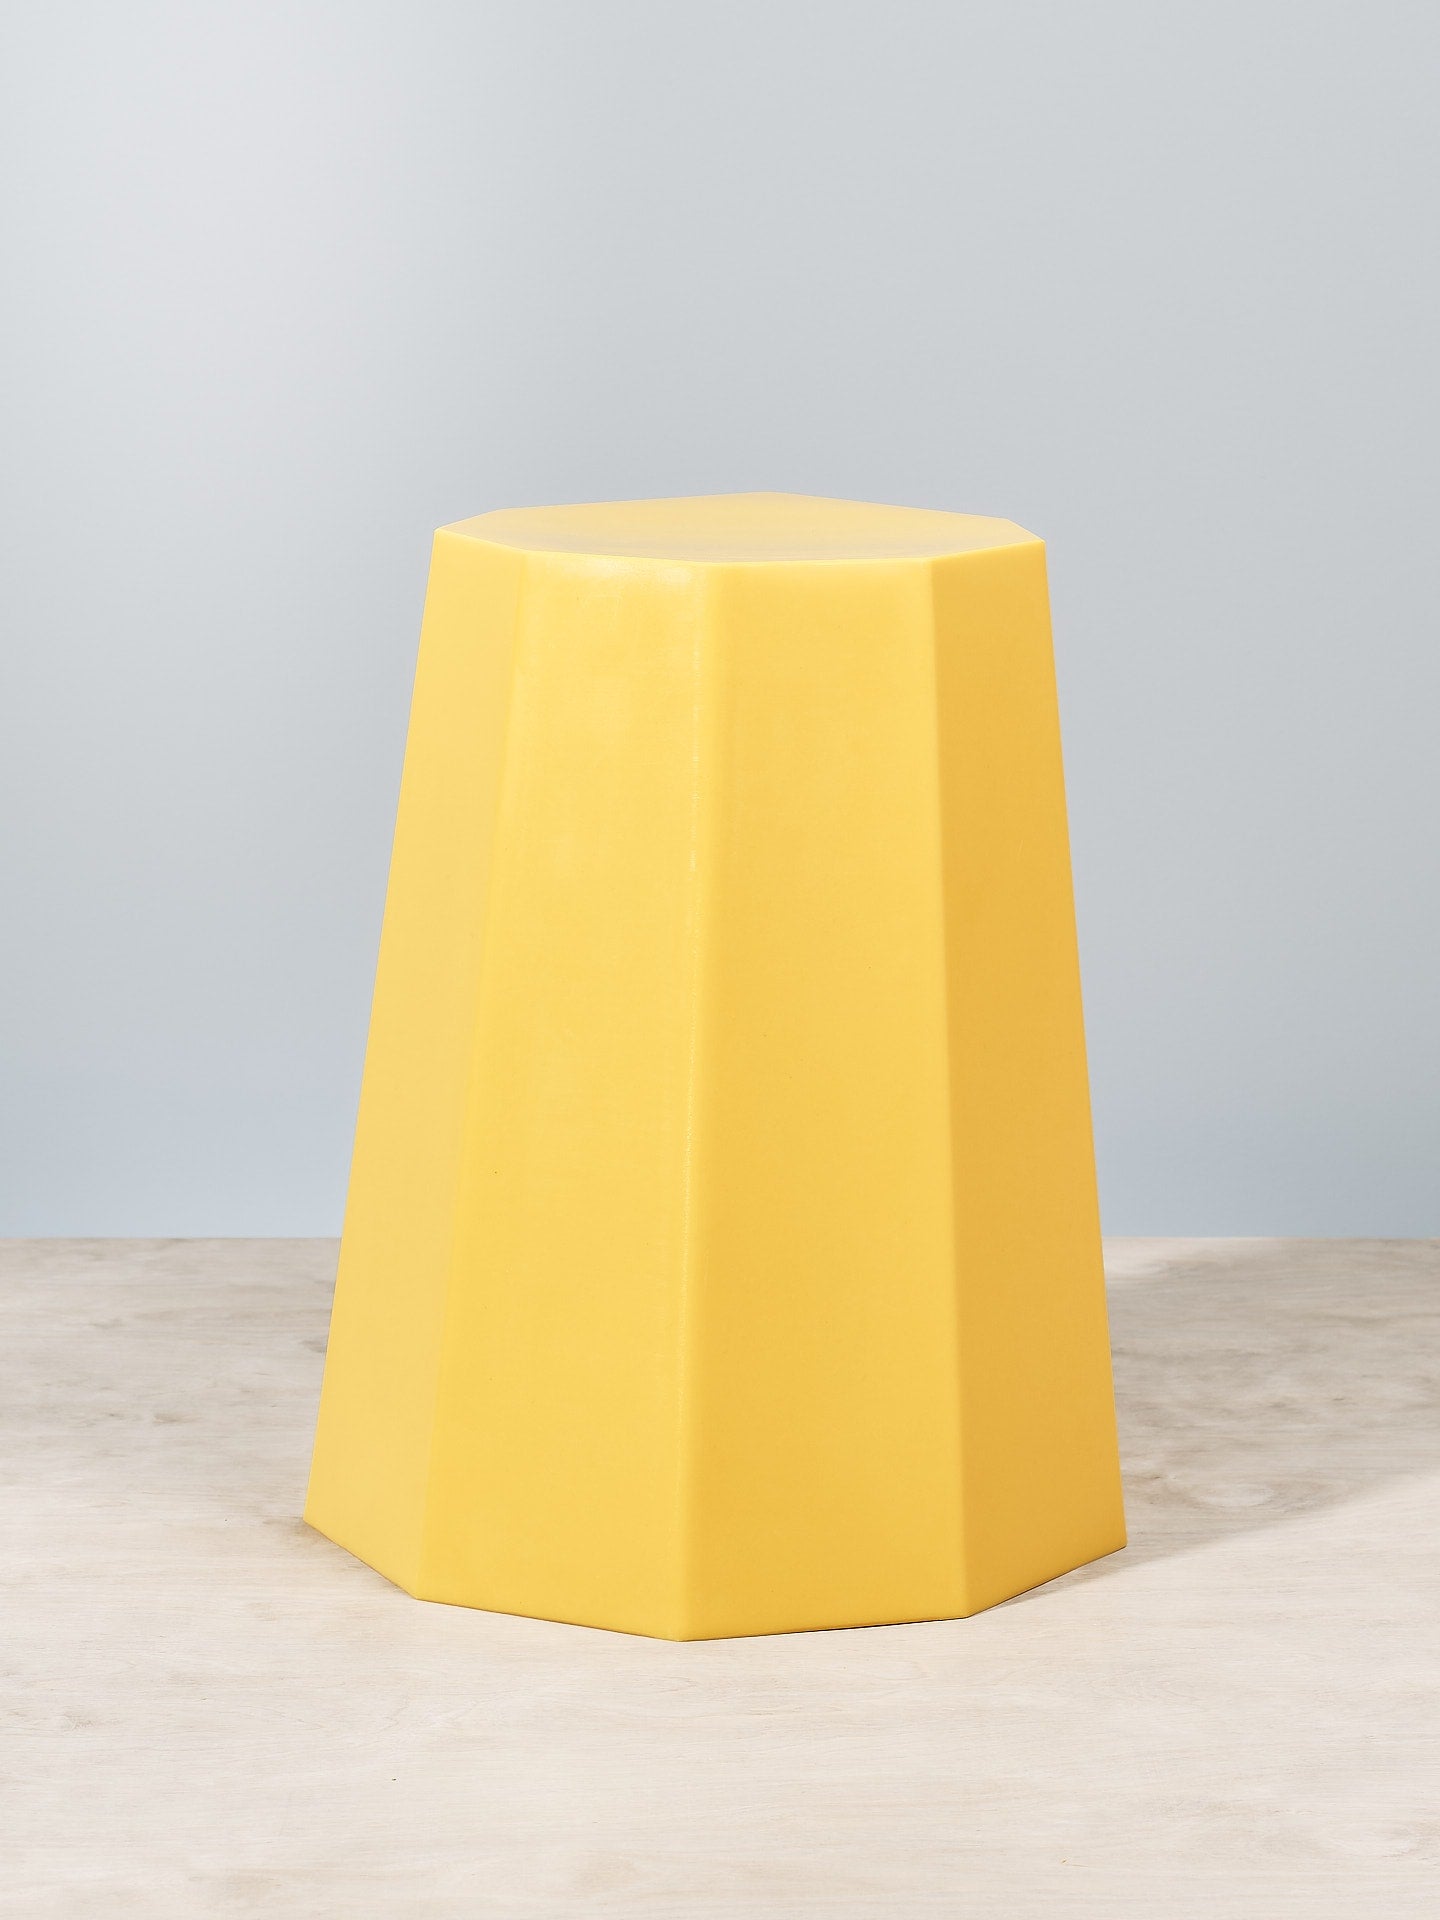 An Arnold Circus Stool – Yellow by Martino Gamper sitting on top of a wooden table.